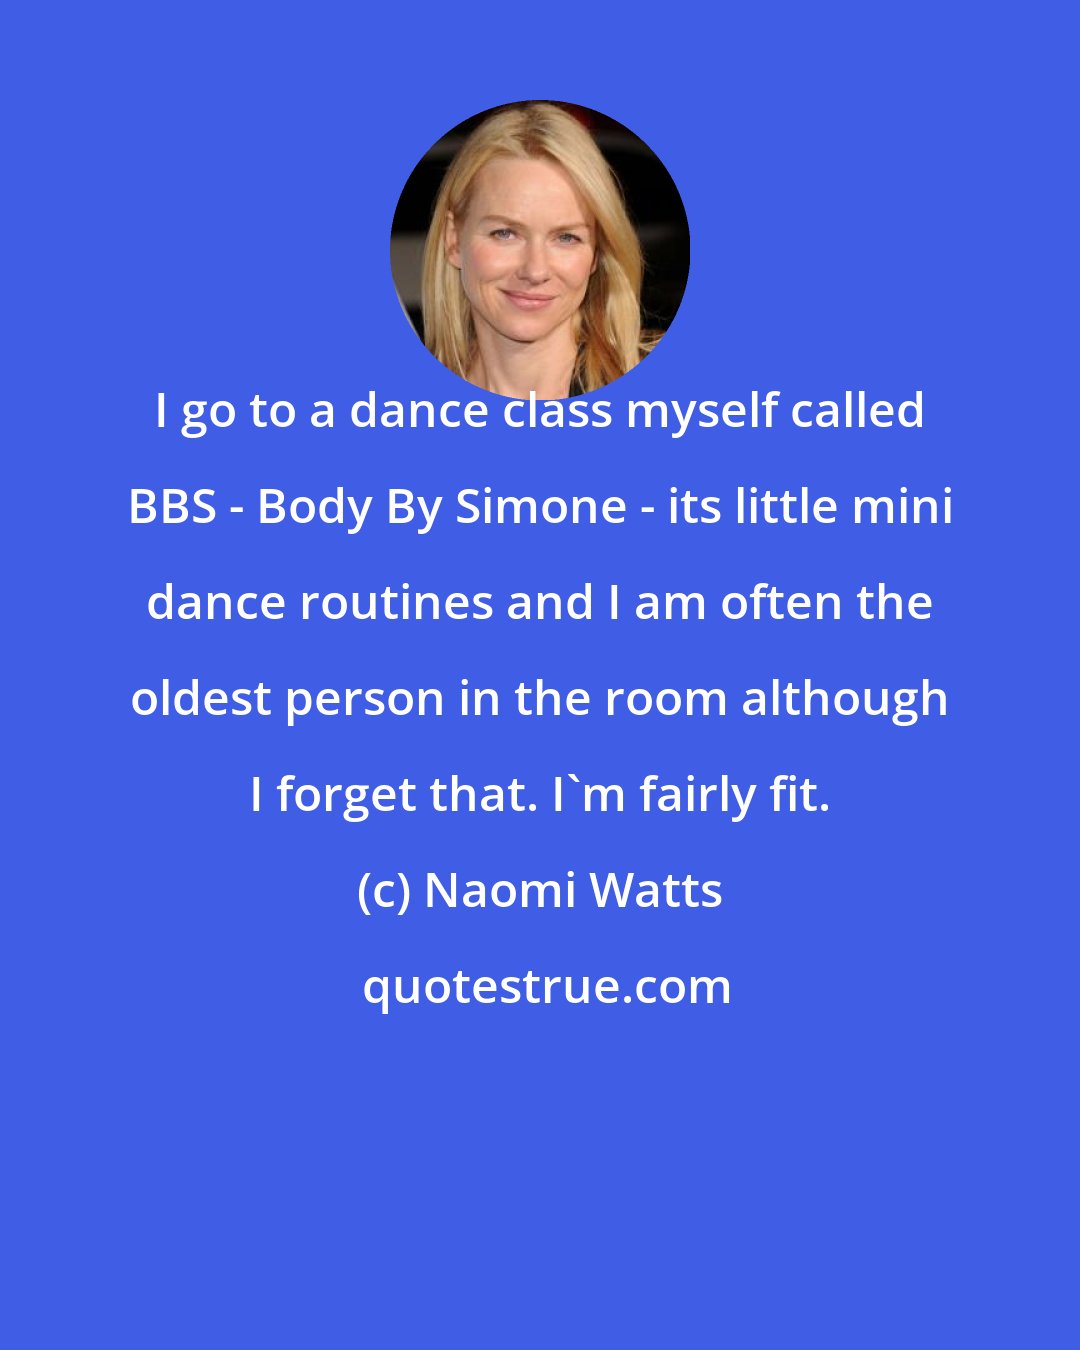 Naomi Watts: I go to a dance class myself called BBS - Body By Simone - its little mini dance routines and I am often the oldest person in the room although I forget that. I'm fairly fit.